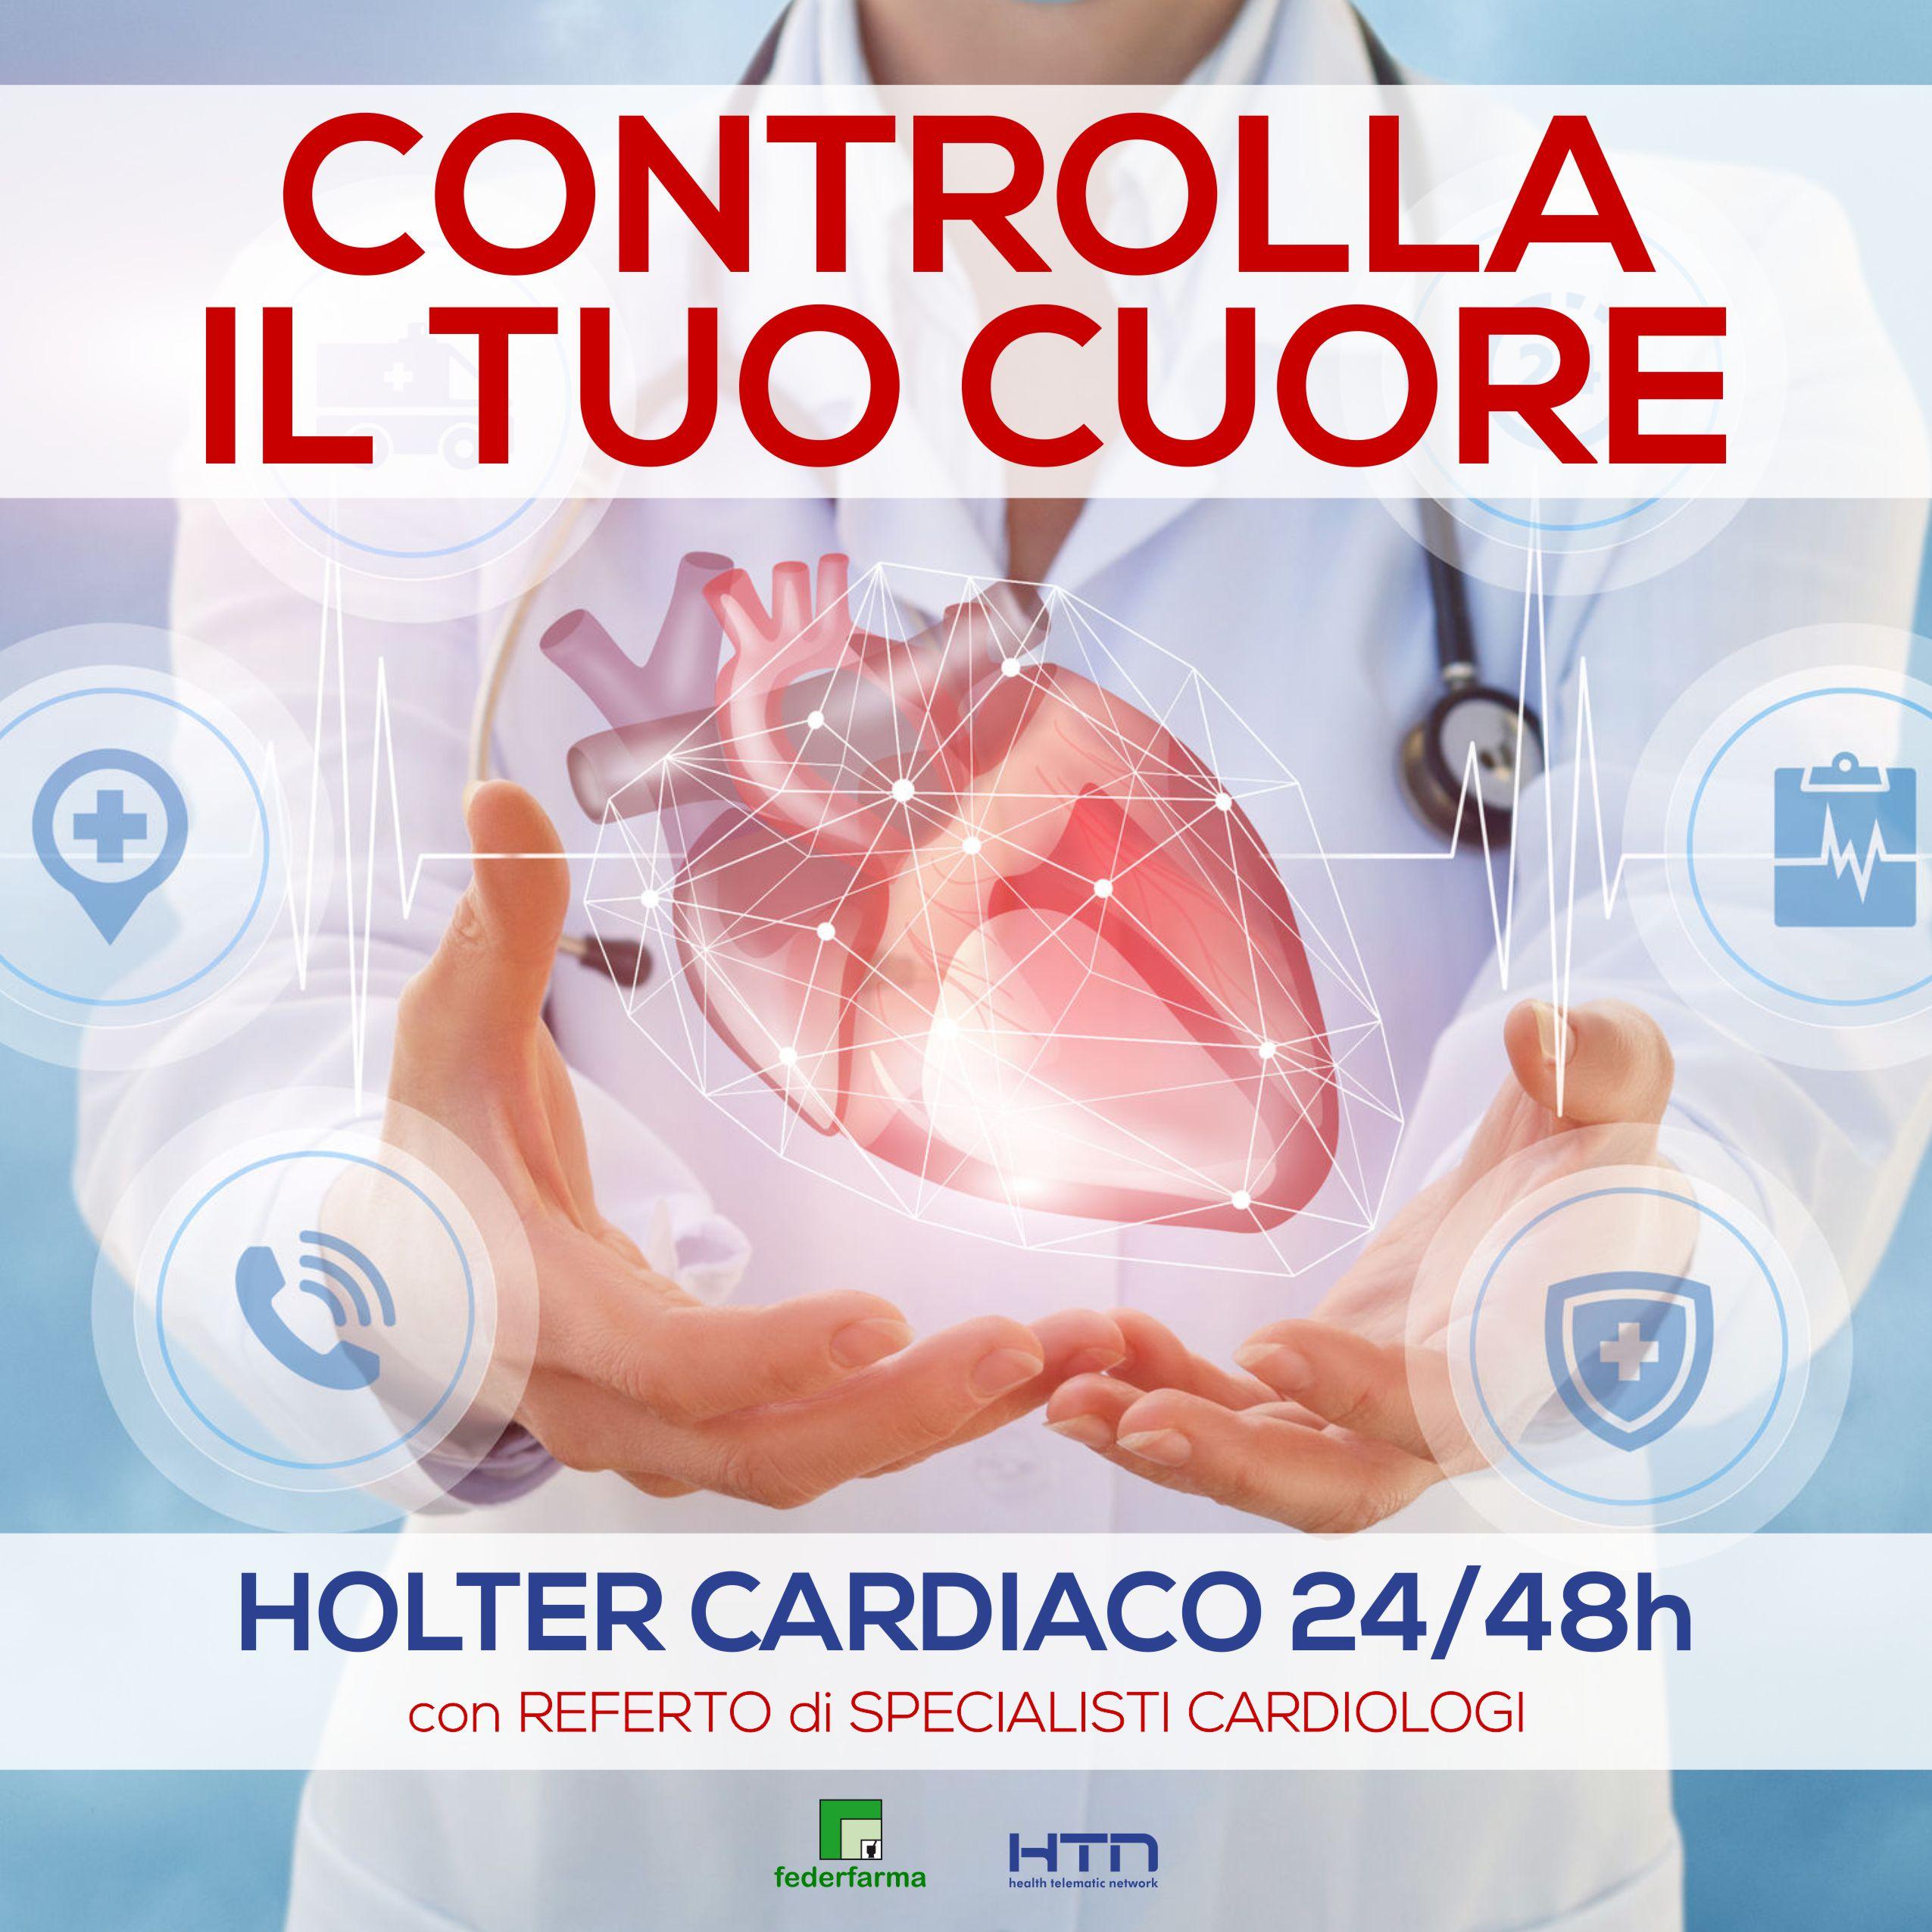 Holter cardiaco 24/48h